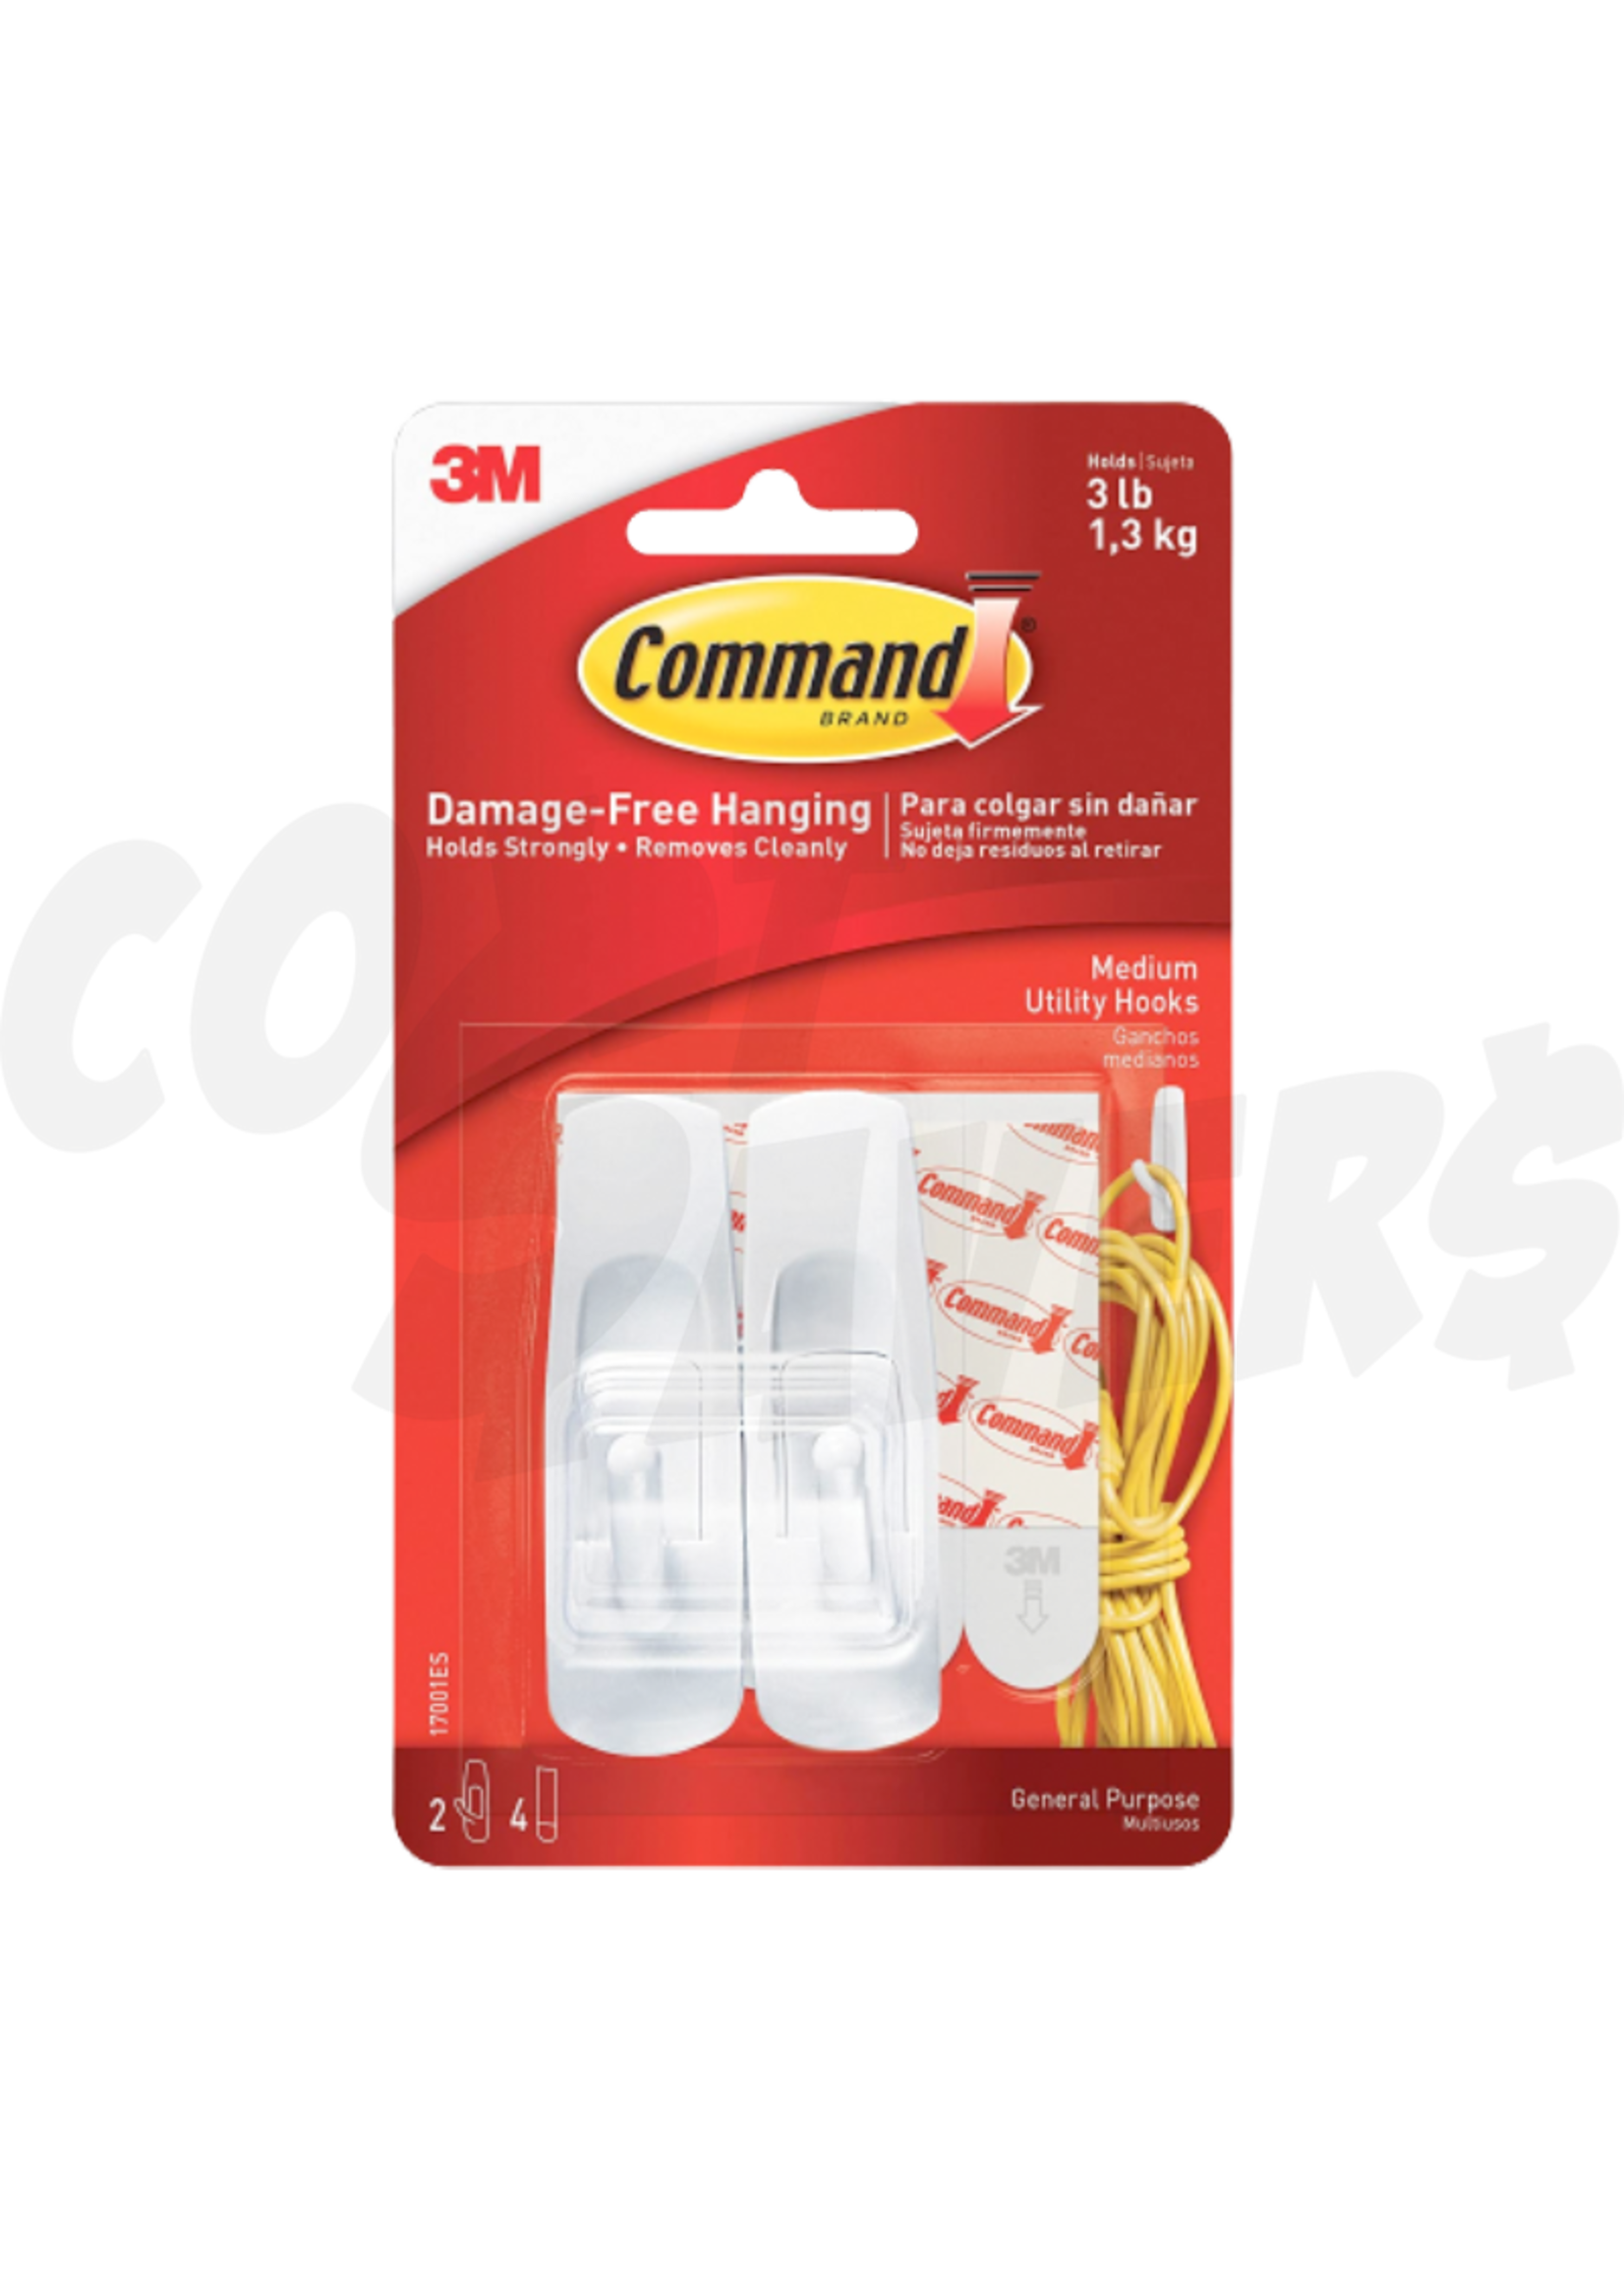 3M Command Damage Free 2 Hooks 4 Med. Strips 3lbs